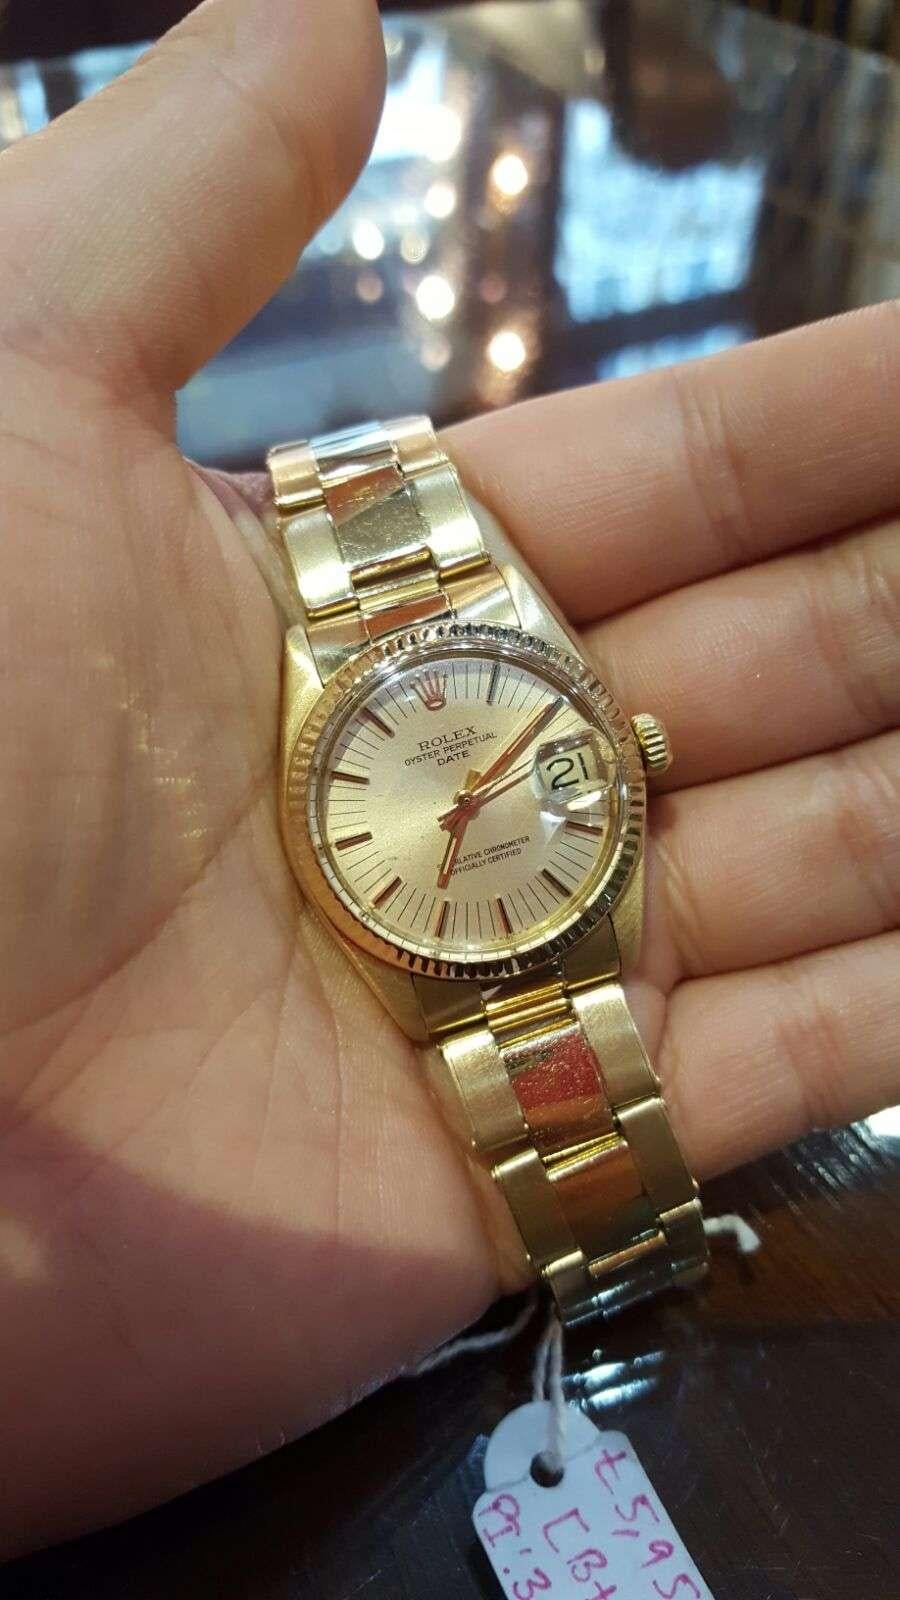 A 1970s 18k Yellow Gold Oyster Perpetual Date Mid-Size Wristwatch, champagne dial with applied hour markers, date at 3 0'clock, a fixed 18k yellow gold fluted bezel, an 18k yellow gold riveted oyster bracelet with an 18k yellow gold deployant clasp,